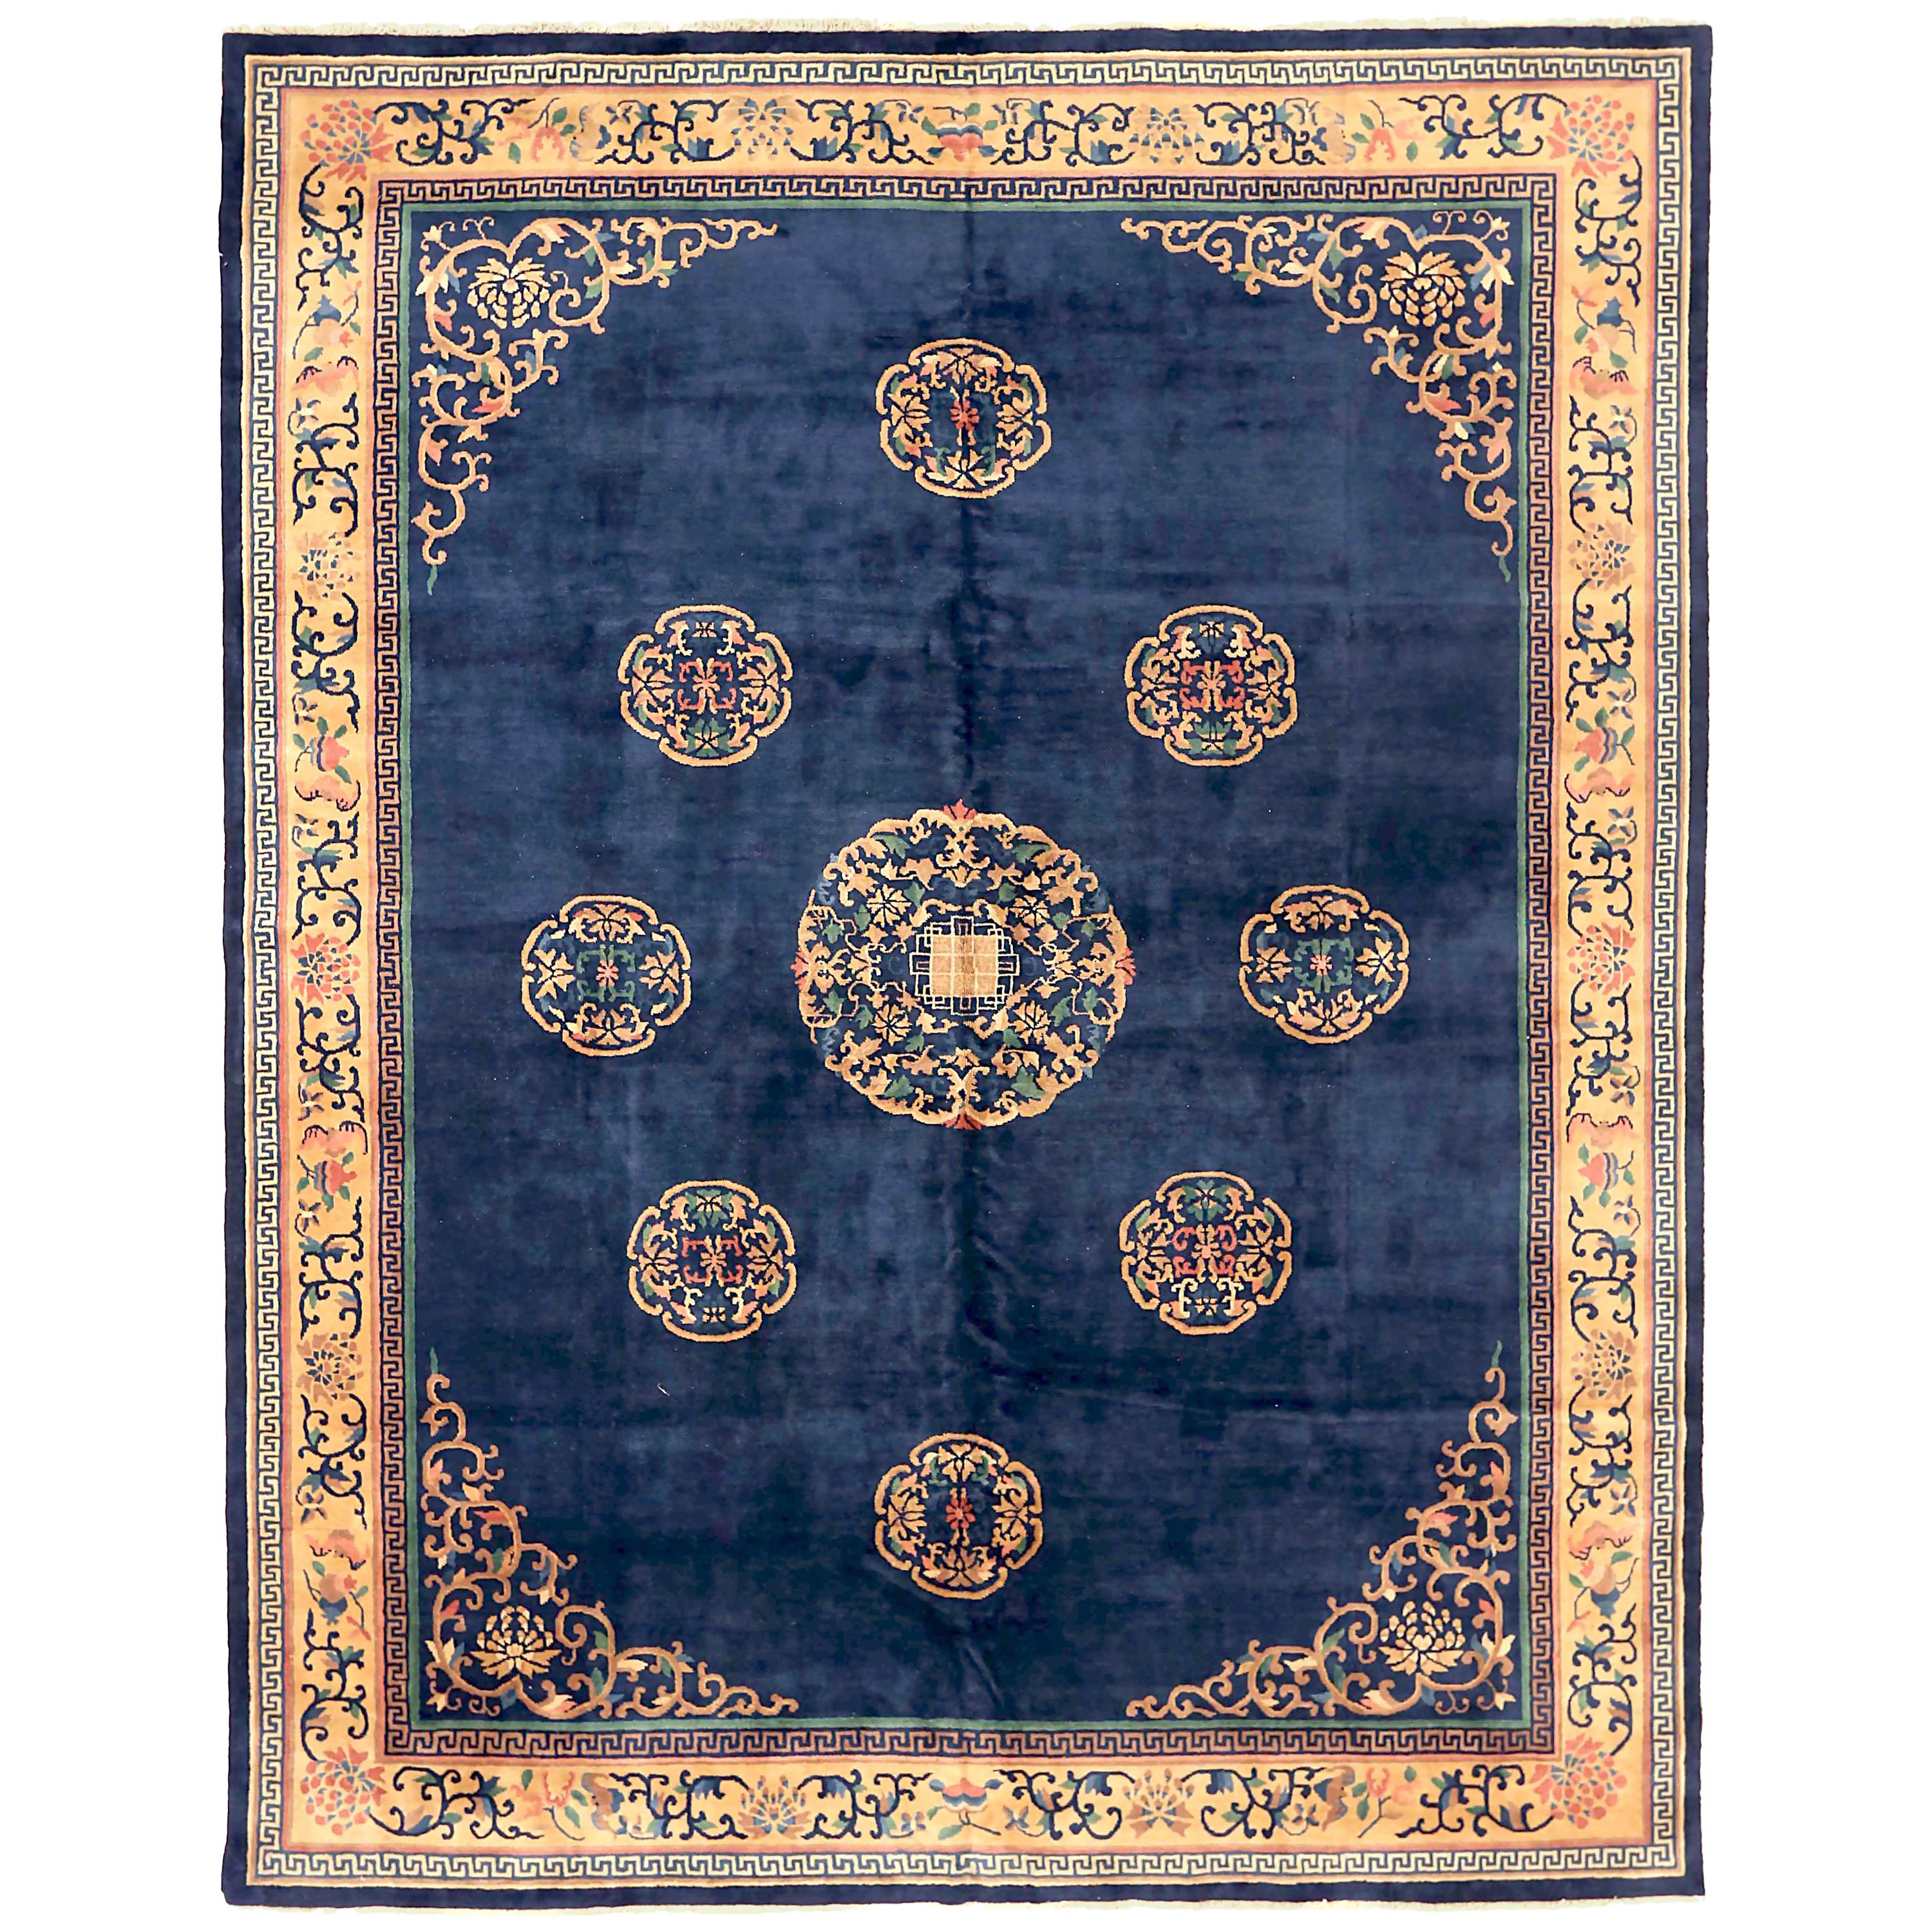 Tapis chinois ancien de conception chinoise